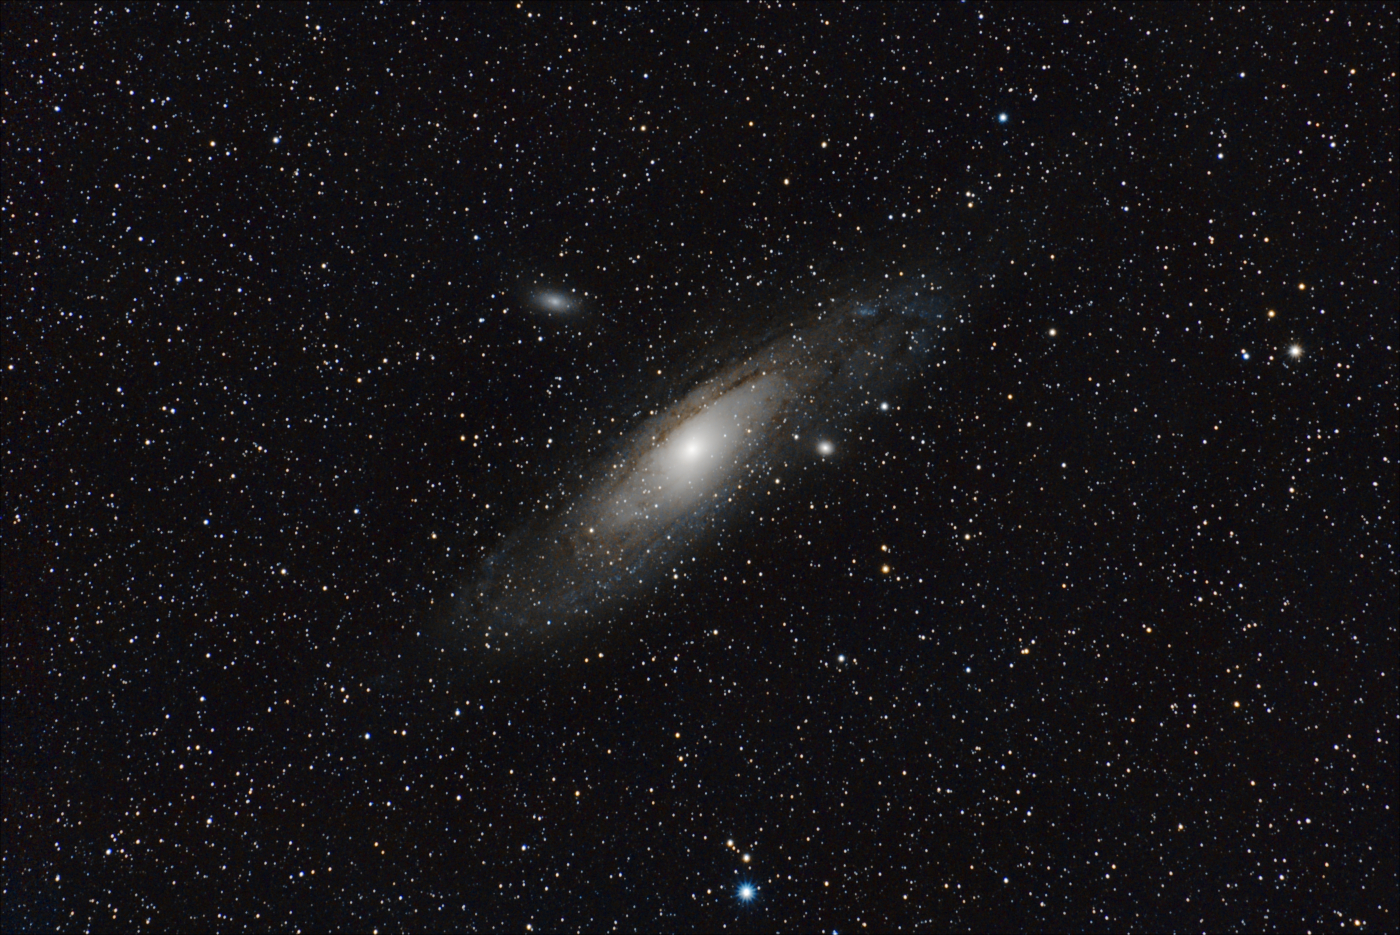 The final calibrated and stacked image of Andromeda with my Tamron telephoto zoom lens, utilizing Siril for calibration processing, alignment, stacking, and stretching.